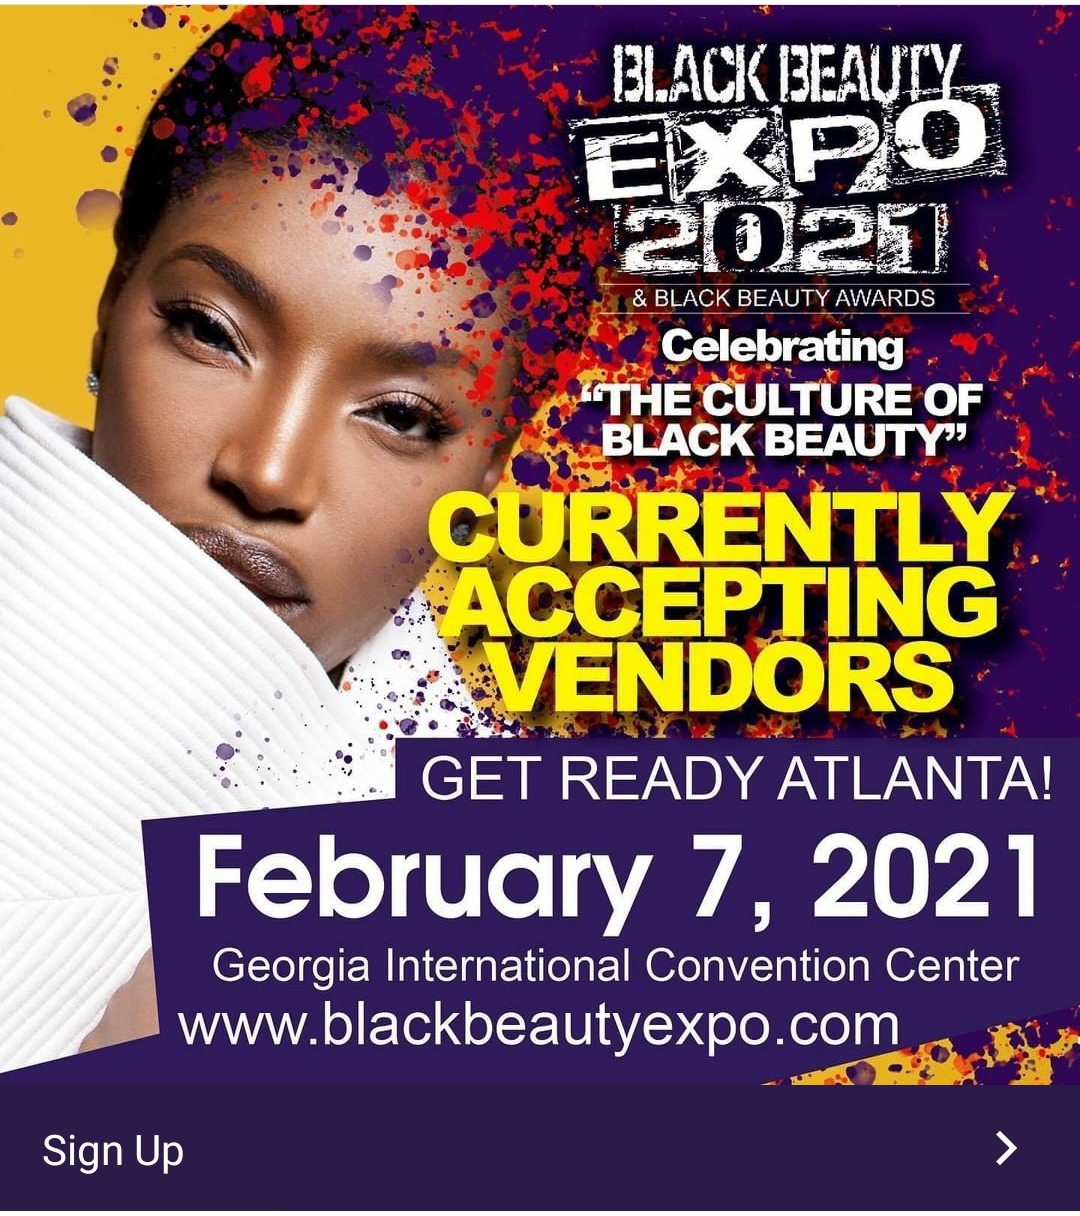 kerryannbrownmusicpromotions: BLACK BEAUTY EXPO 2021 ...